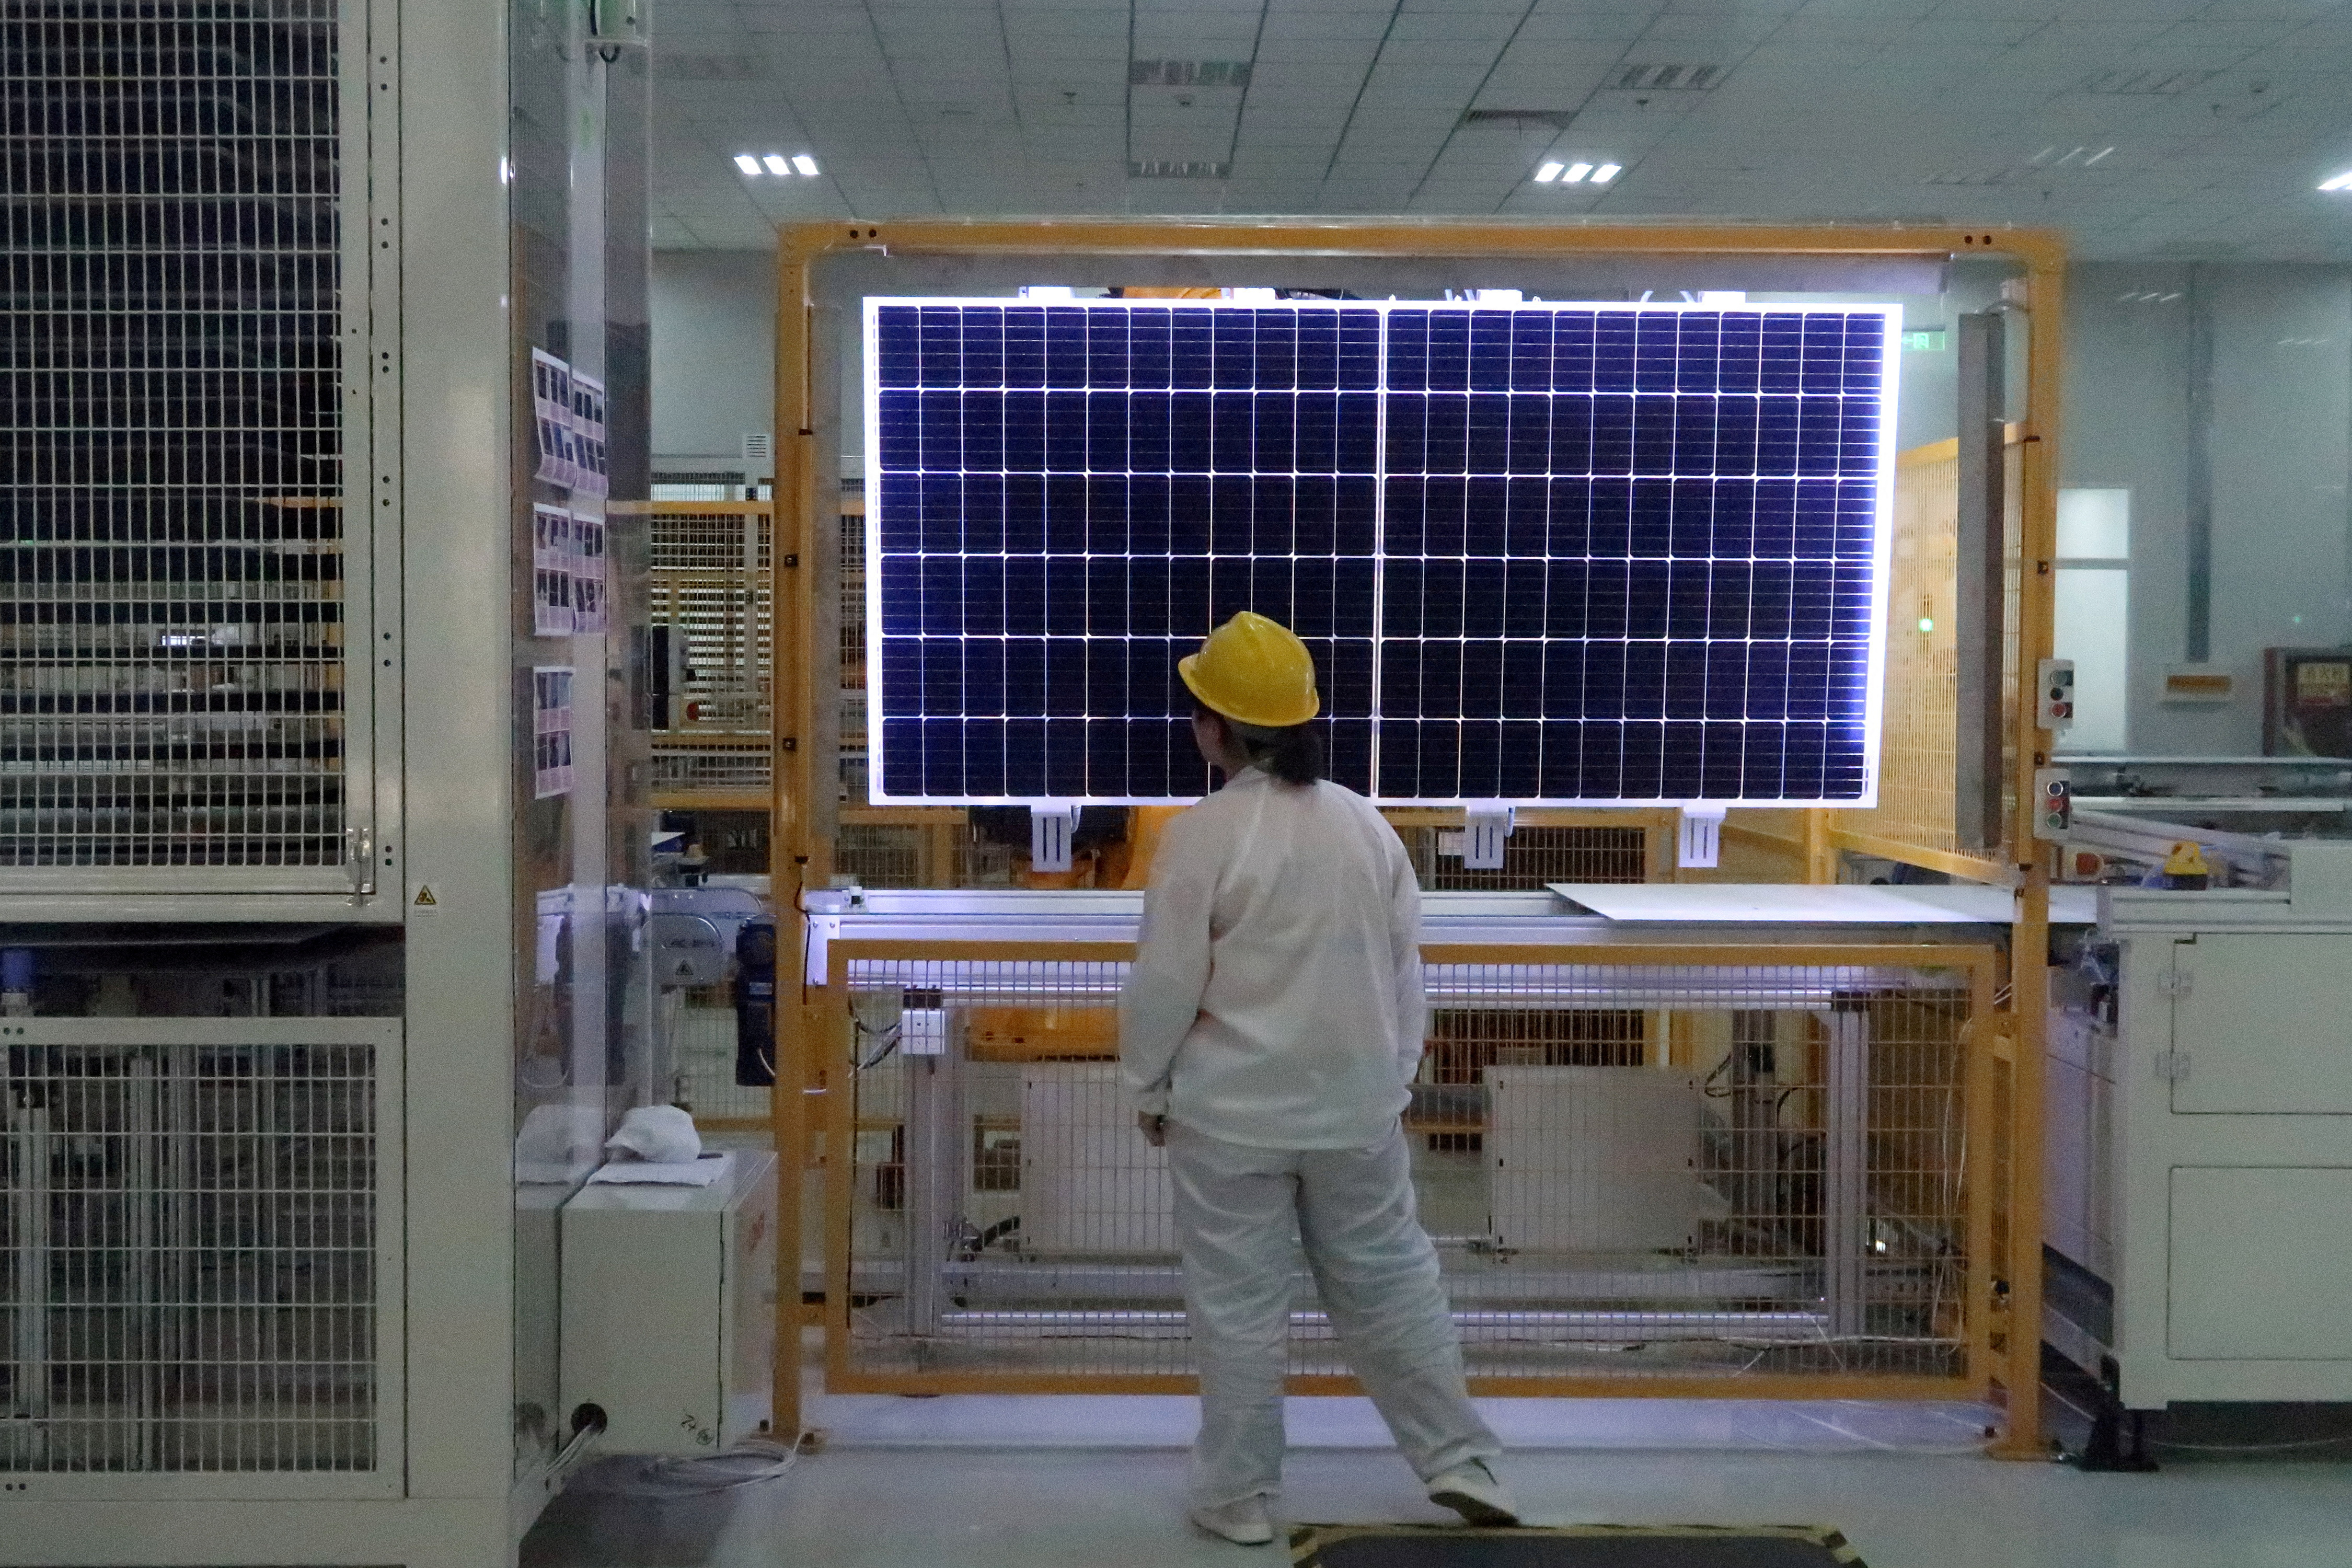 Worker conducts quality-check of a solar module product at a factory of a monocrystalline silicon solar equipment manufacturer in Xian, Shaanxi